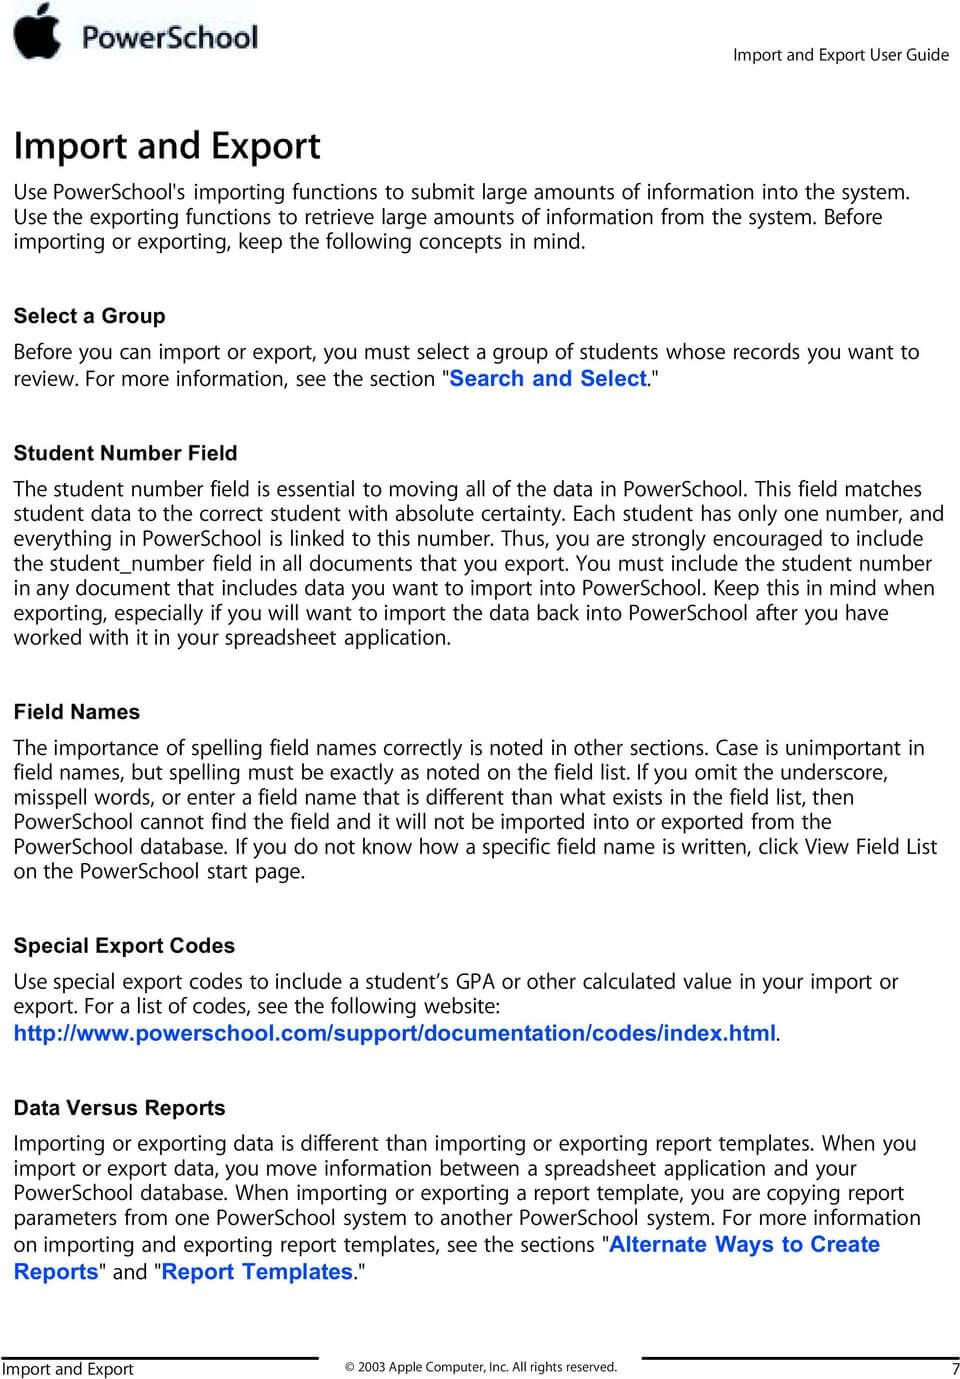 Import And Export User Guide Powerschool Student Information In Powerschool Reports Templates